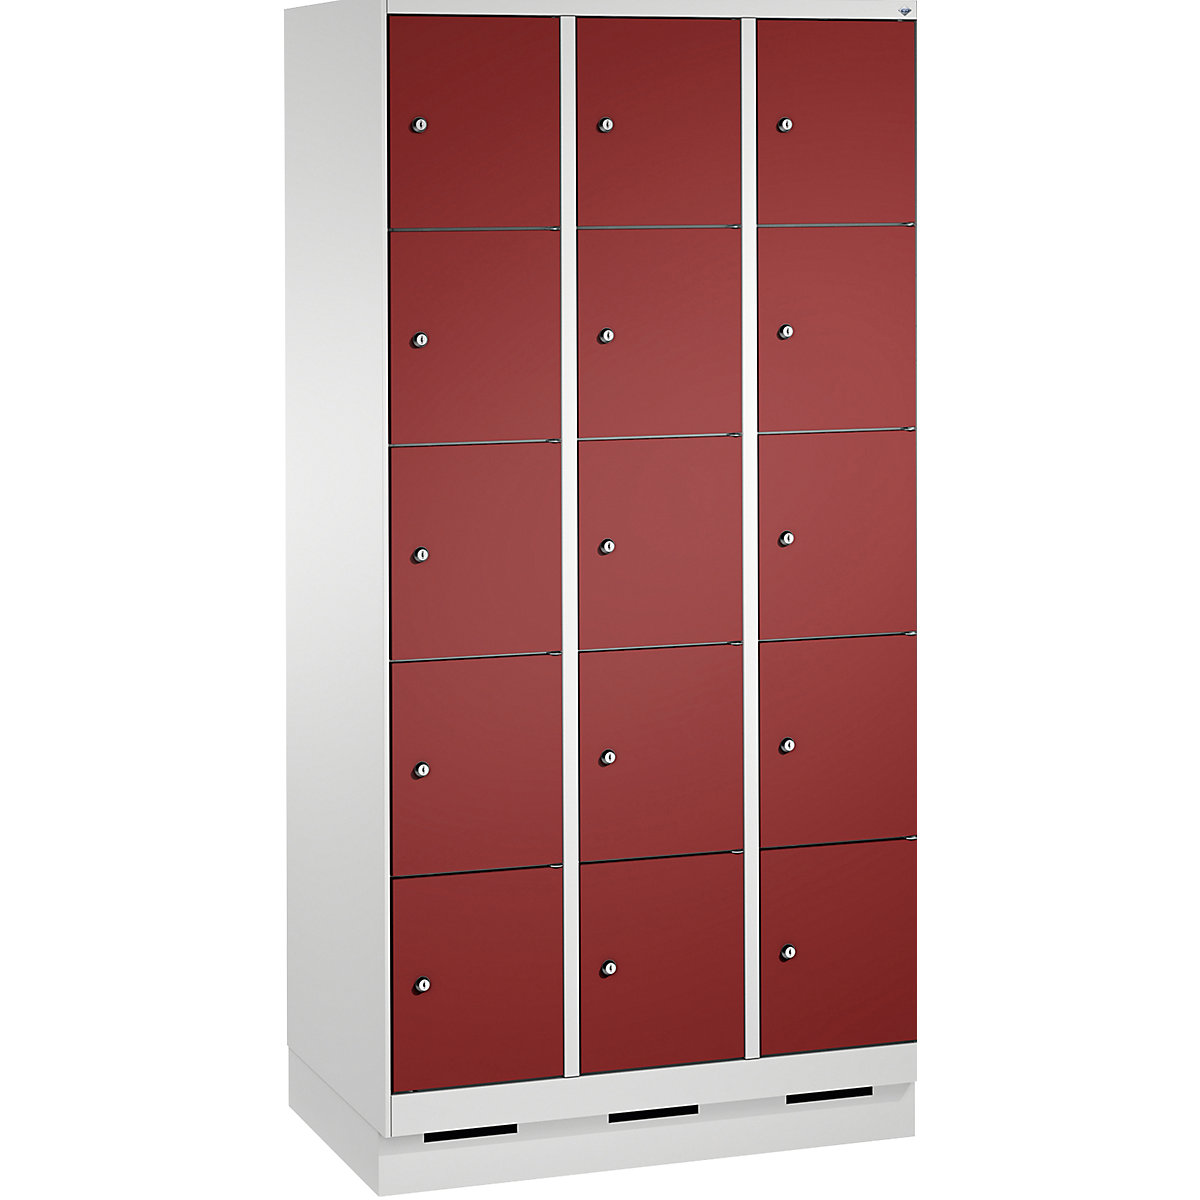 EVOLO locker unit, with plinth – C+P, 3 compartments, 5 shelf compartments each, compartment width 300 mm, light grey / ruby red